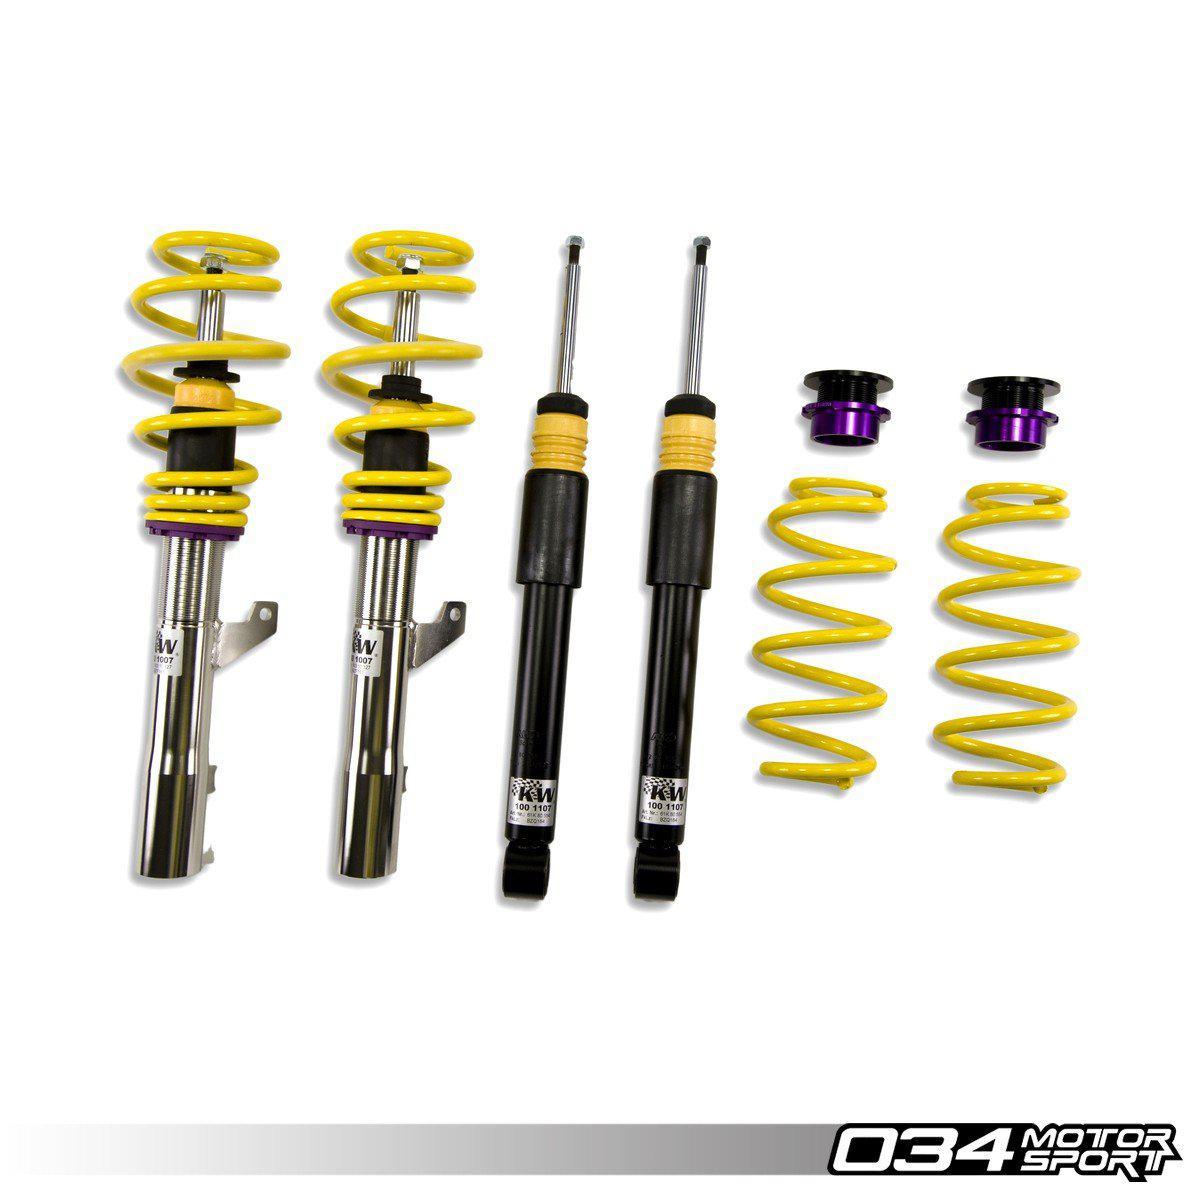 KW Variant 2 Coilover Suspension, C7/C7.5 Audi A6, FWD & Quattro-A Little Tuning Co